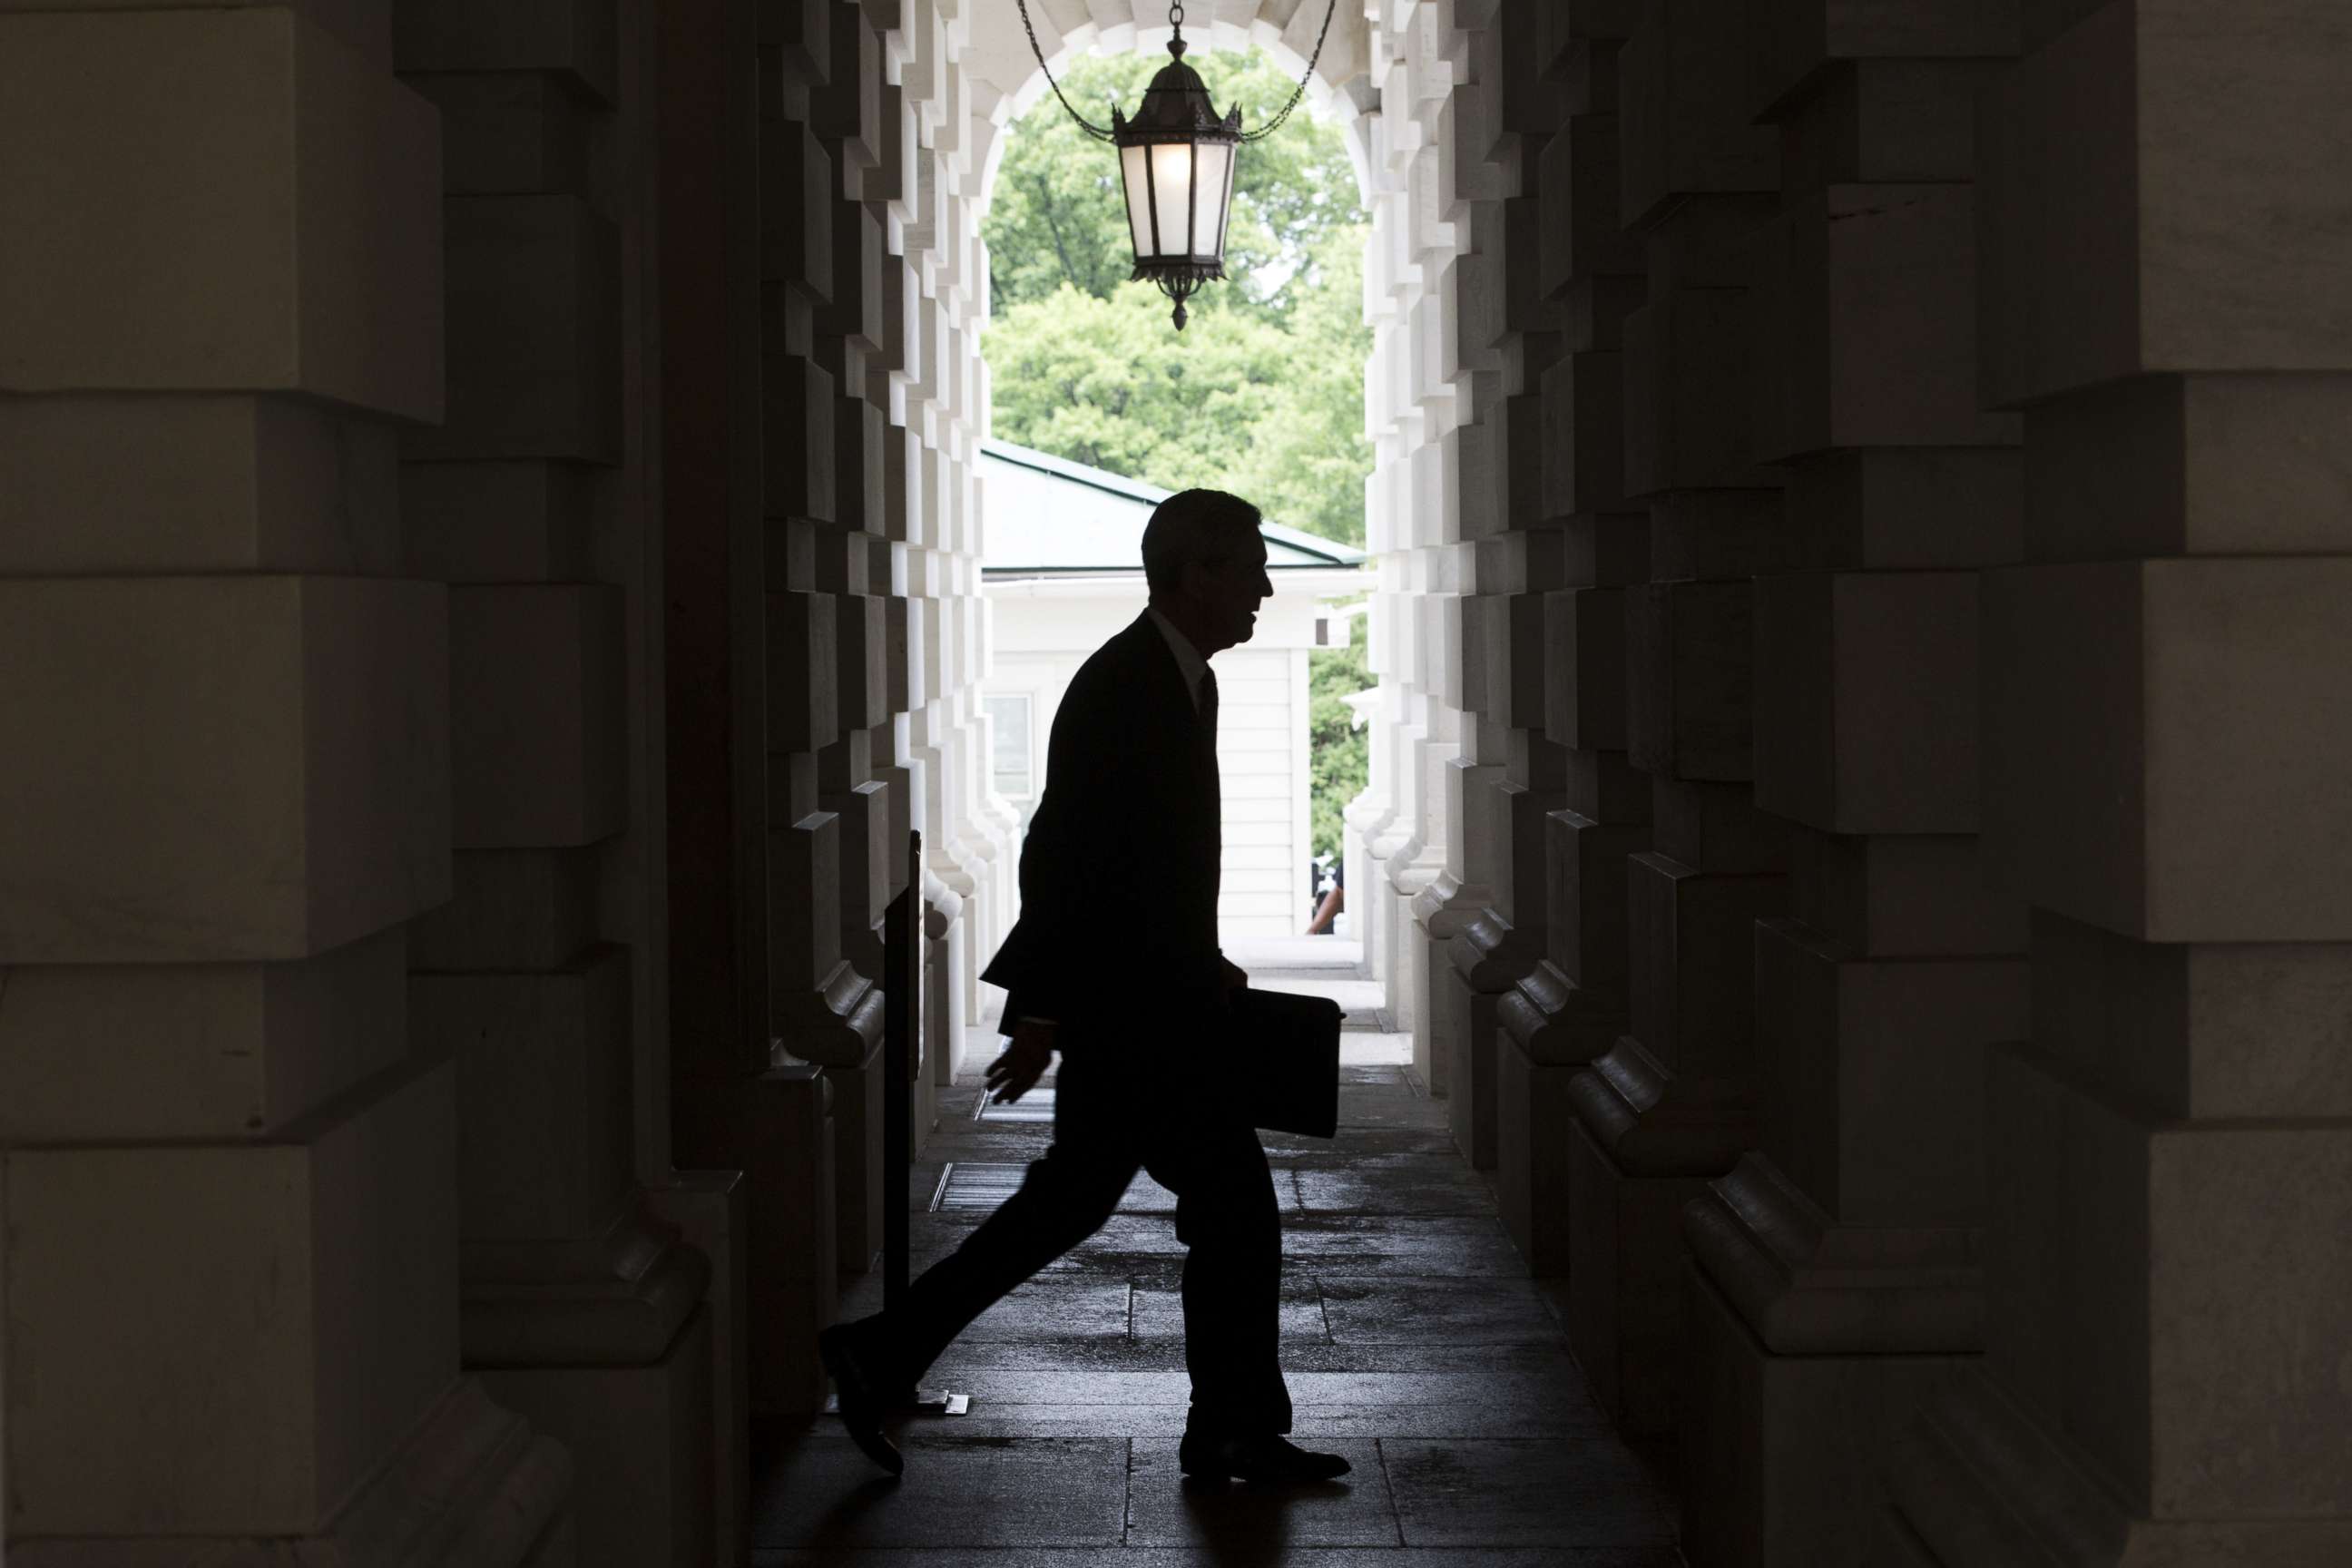 PHOTO: The silhouette of Robert Mueller, former director of the FBI and special counsel for the U.S. Department of Justice, is seen as he leaves the U.S. Capitol Building, June 20, 2017. 